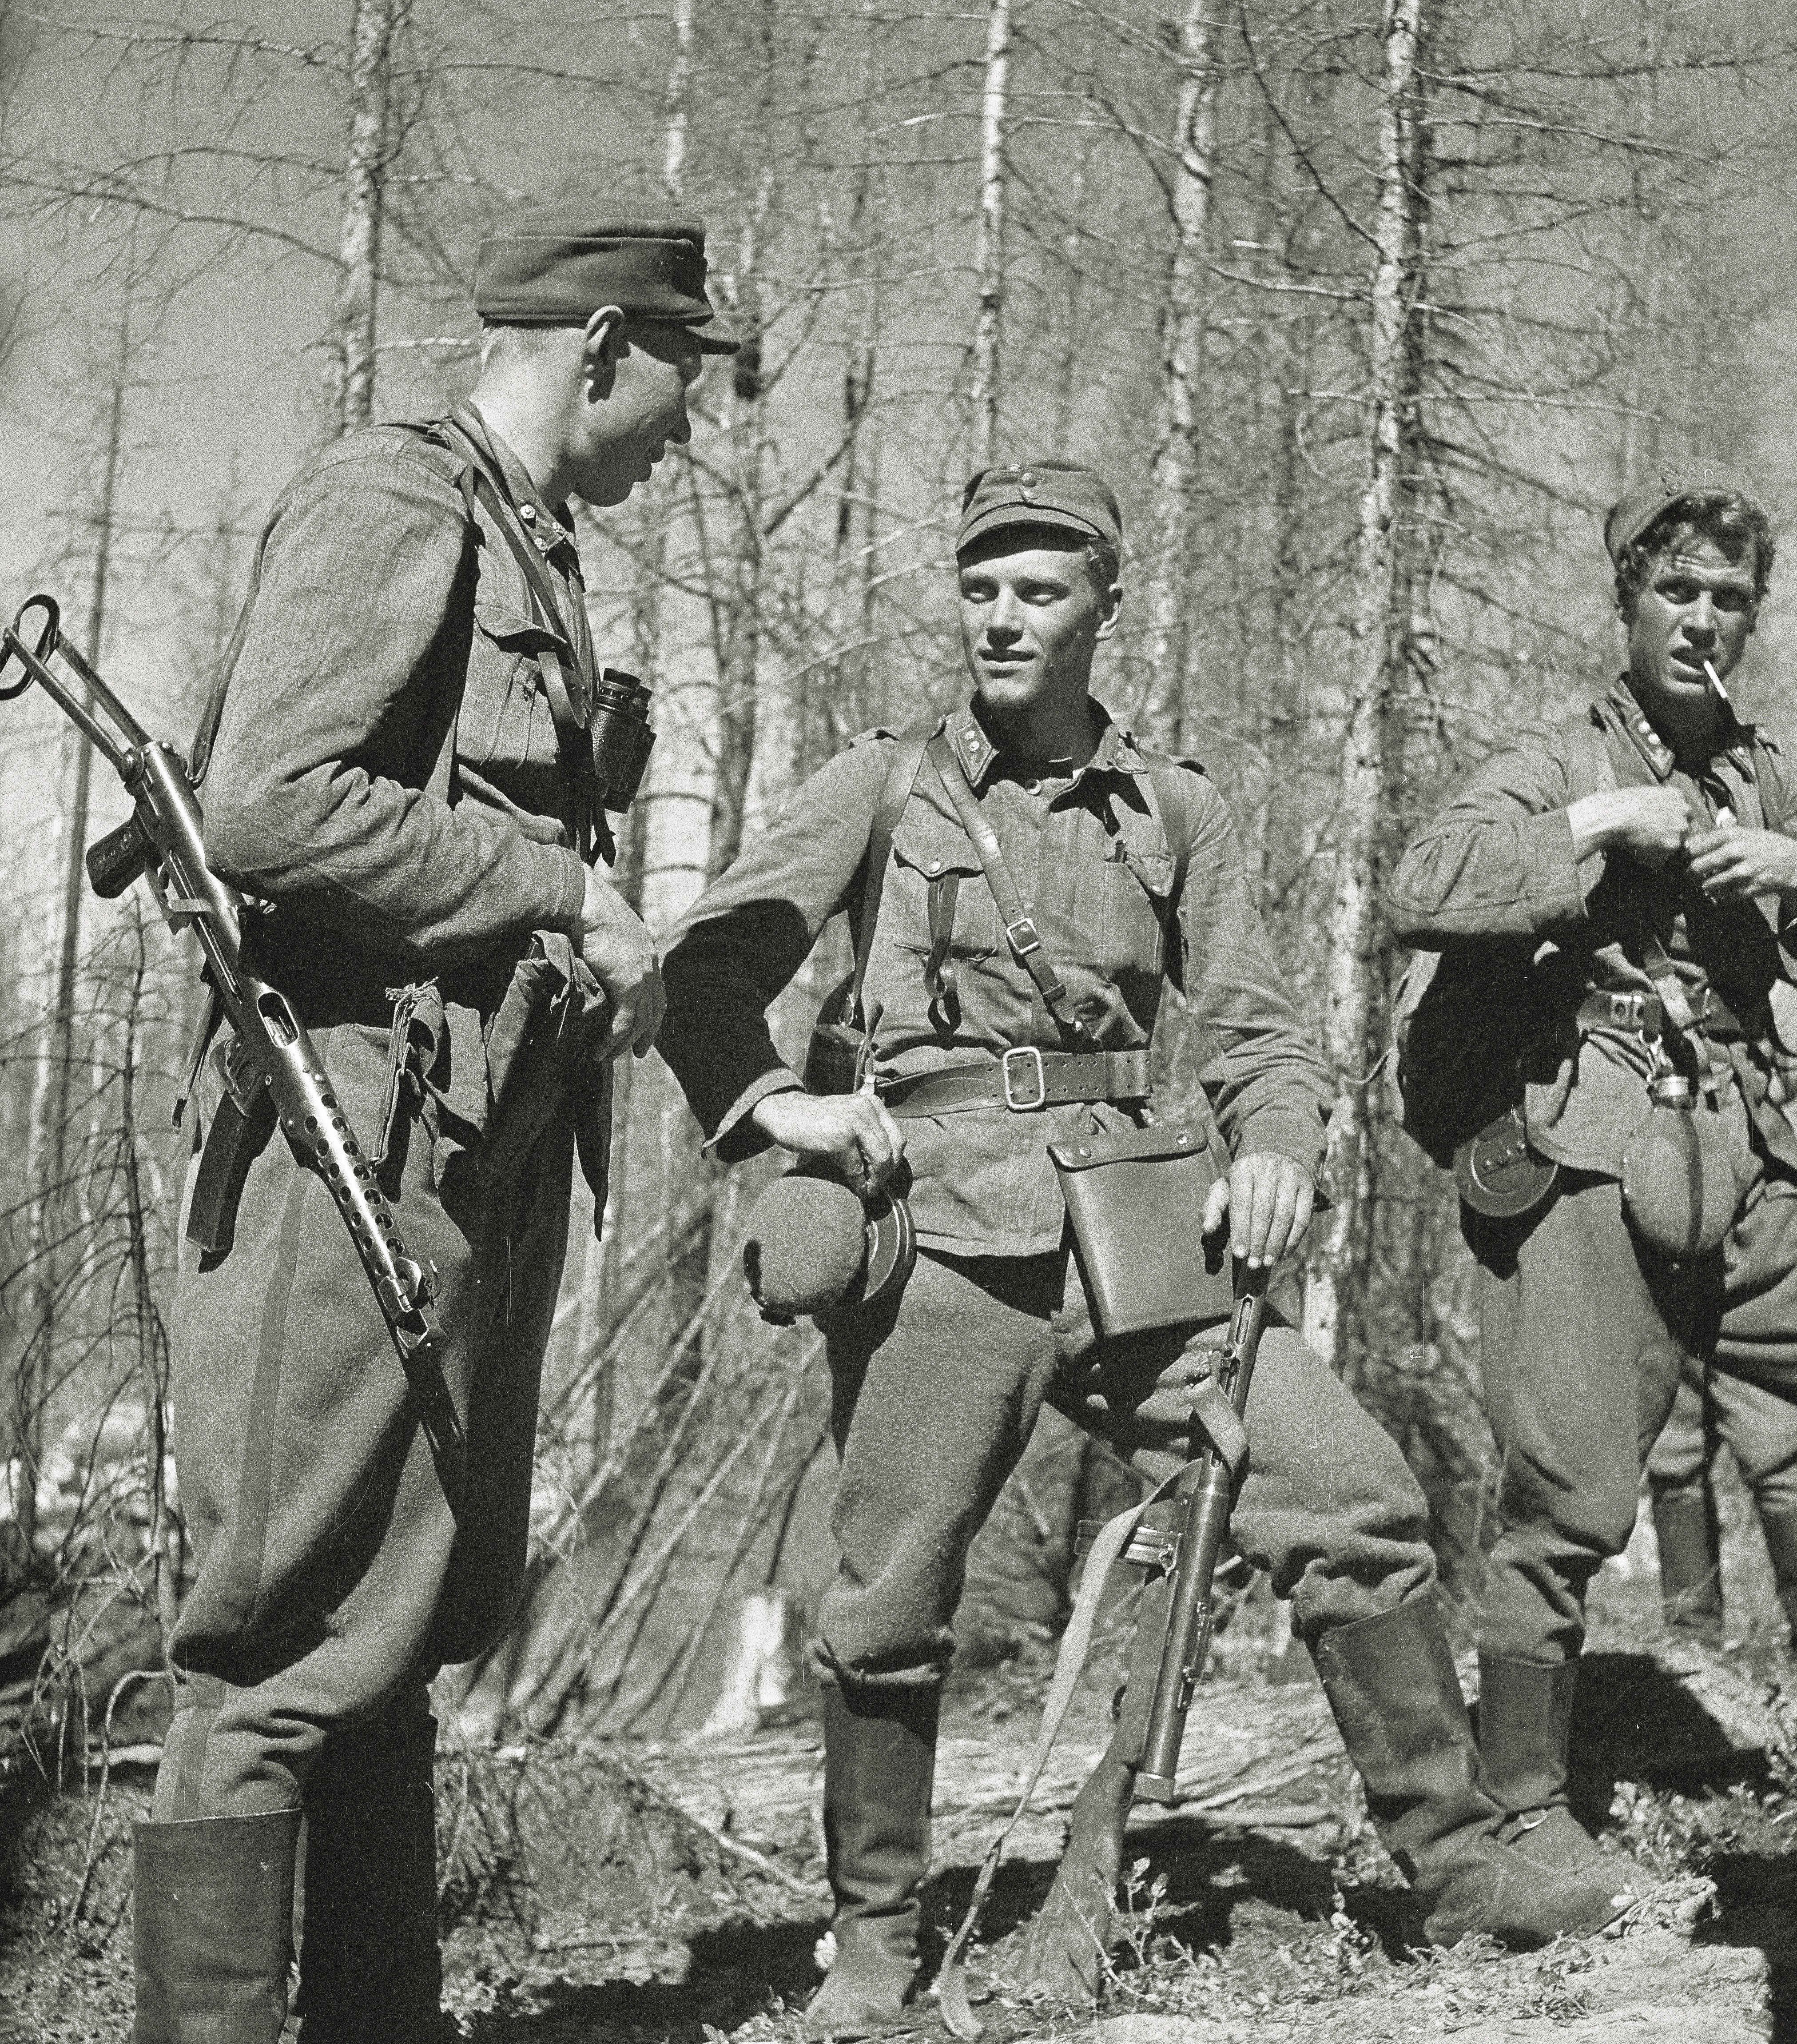 During World War II, TÖrni, at left in July 1944, fought against the Soviets in a Finnish army unit affiliated with the Waffen SS. (Sa-Kuva)